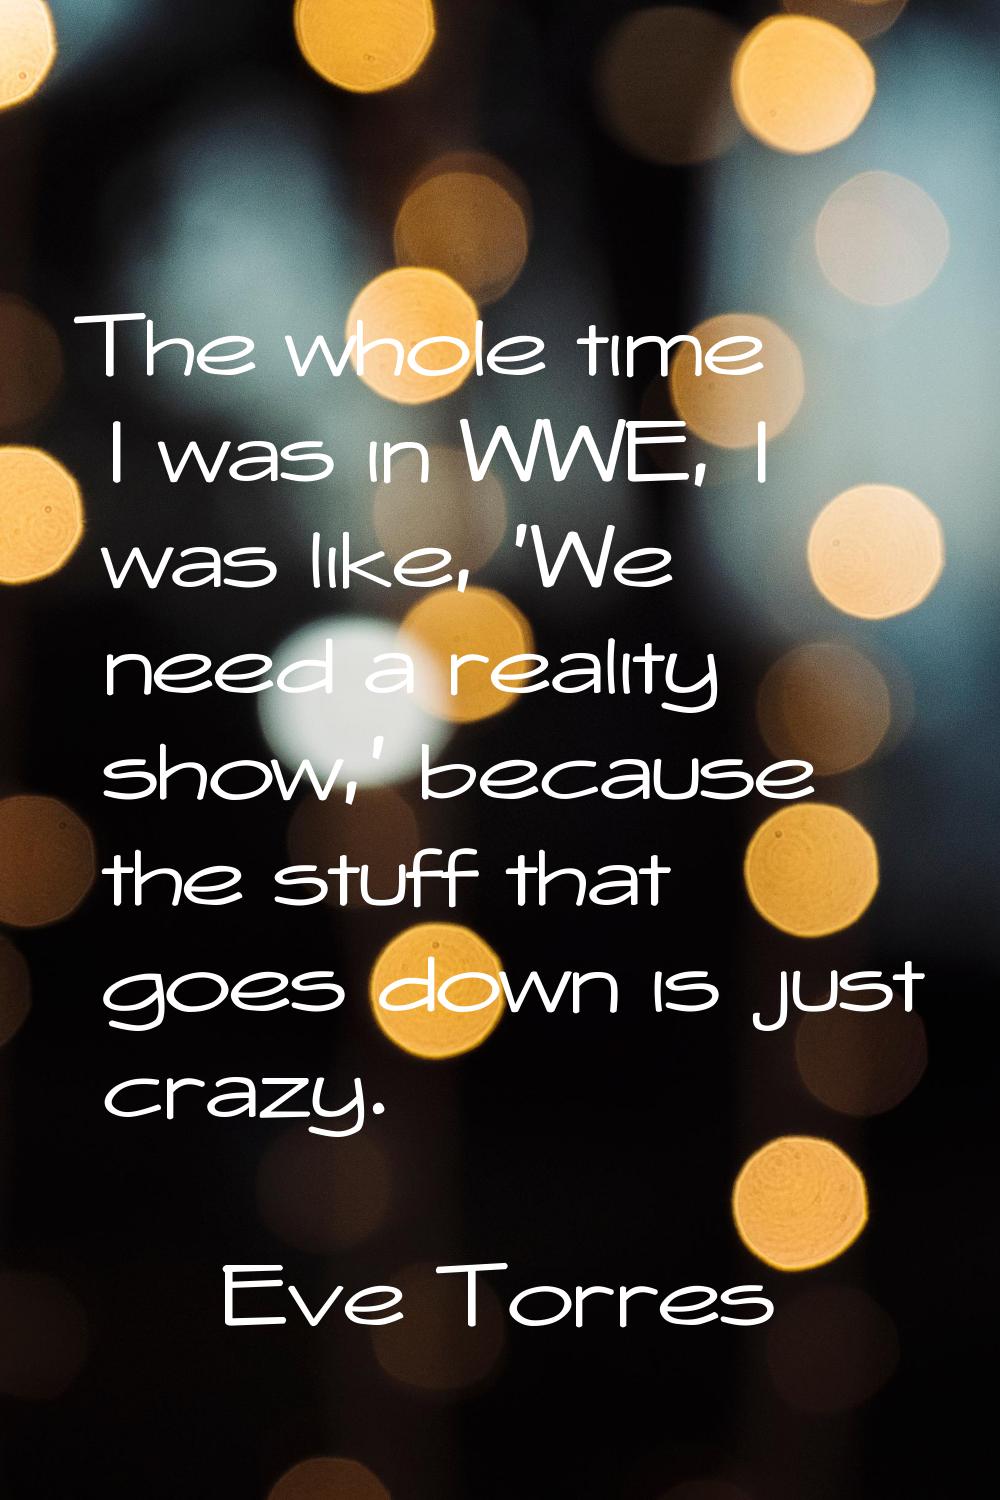 The whole time I was in WWE, I was like, 'We need a reality show,' because the stuff that goes down